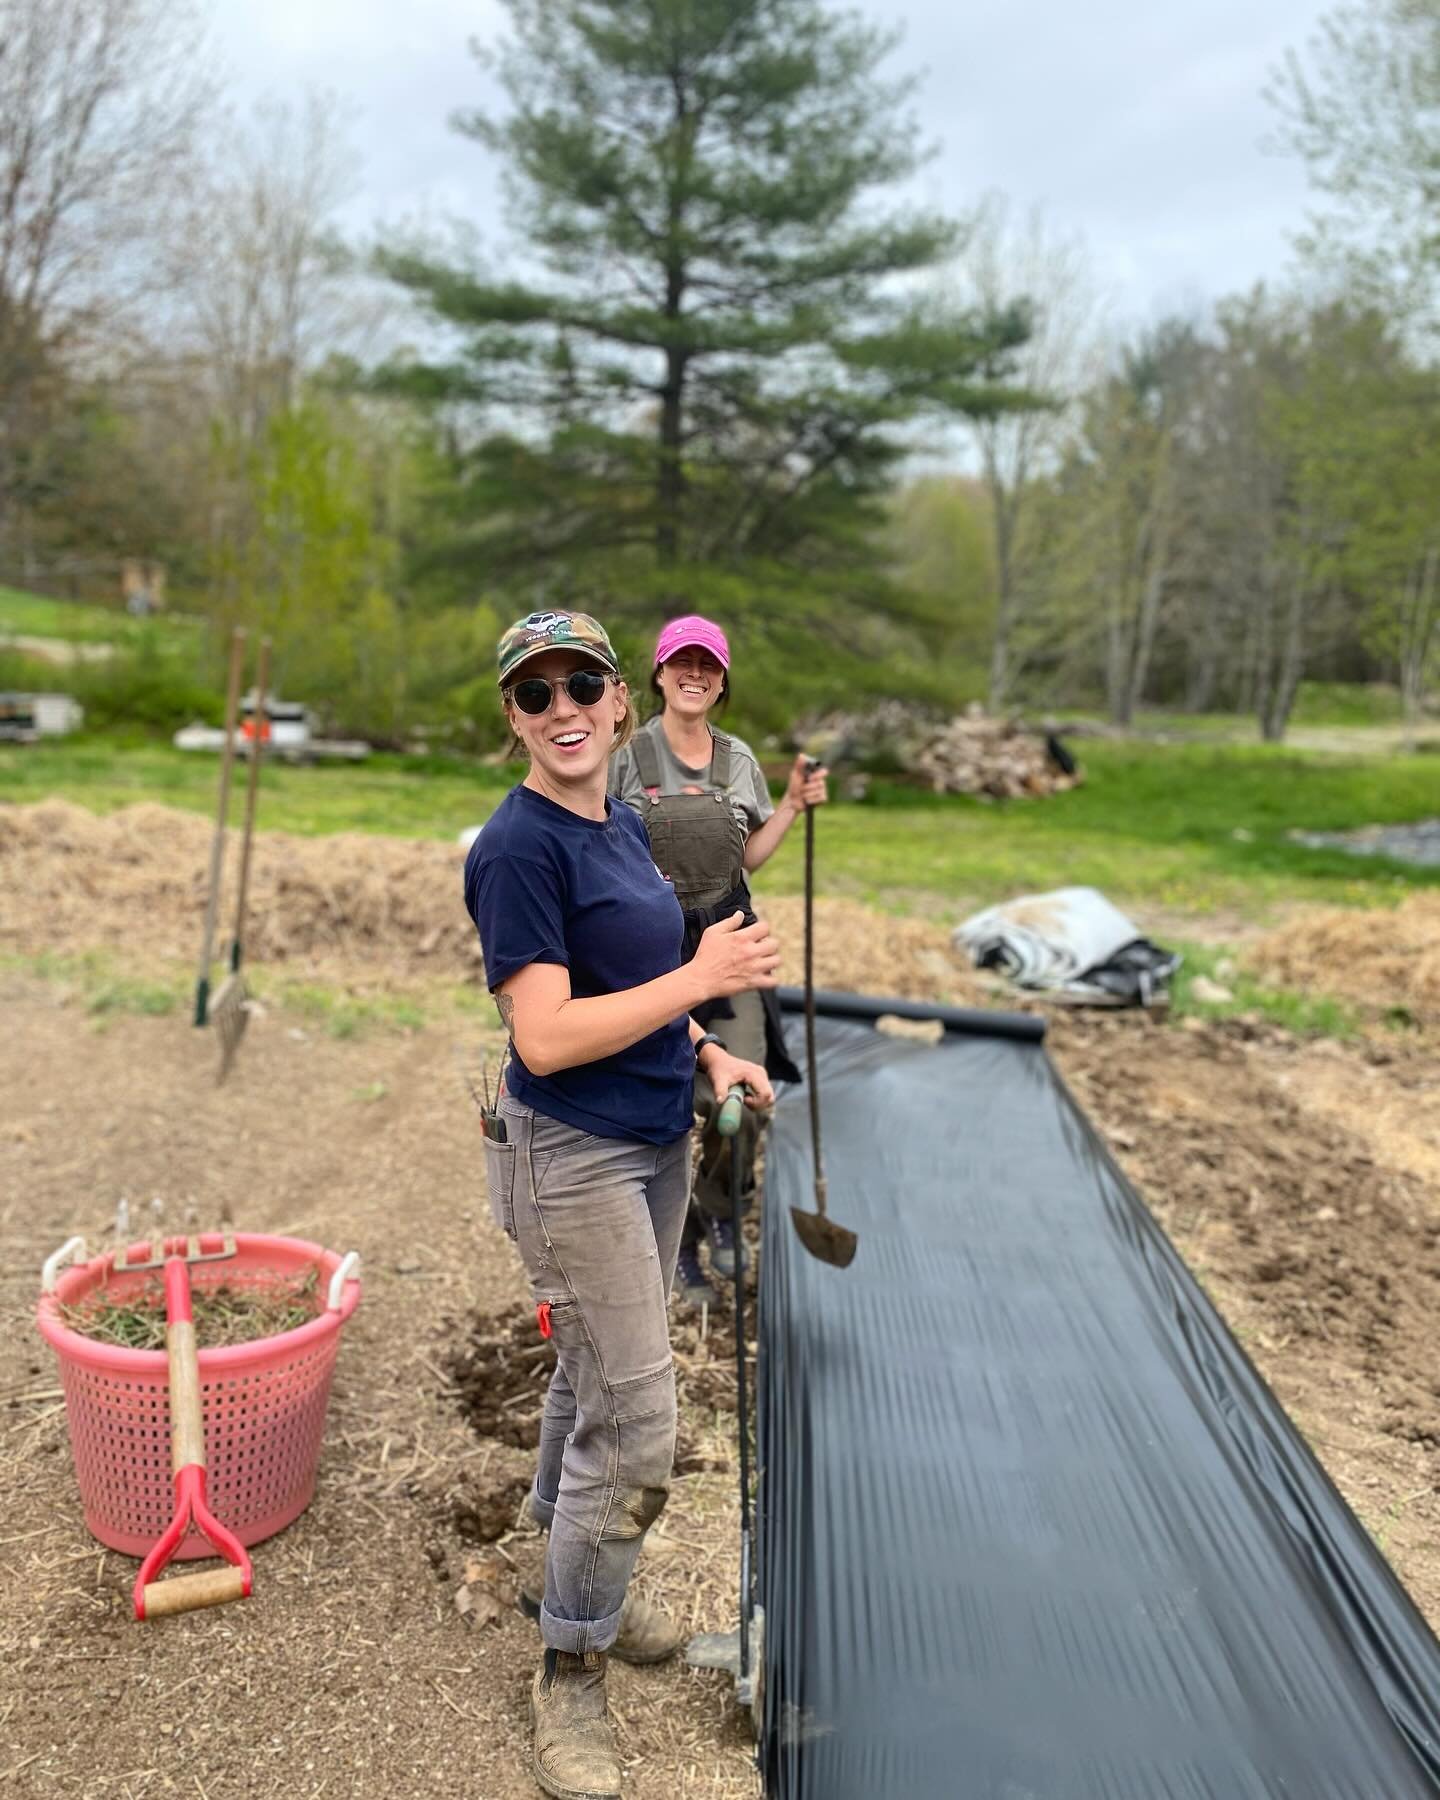 #notill bed prep at @veggiestotable getting the beds ready to plant as fast as we can. It&rsquo;s all done with @_hannaur @victoria_benditt @tilmanpitcher @bonita.johnson.129 @kateloveskale123